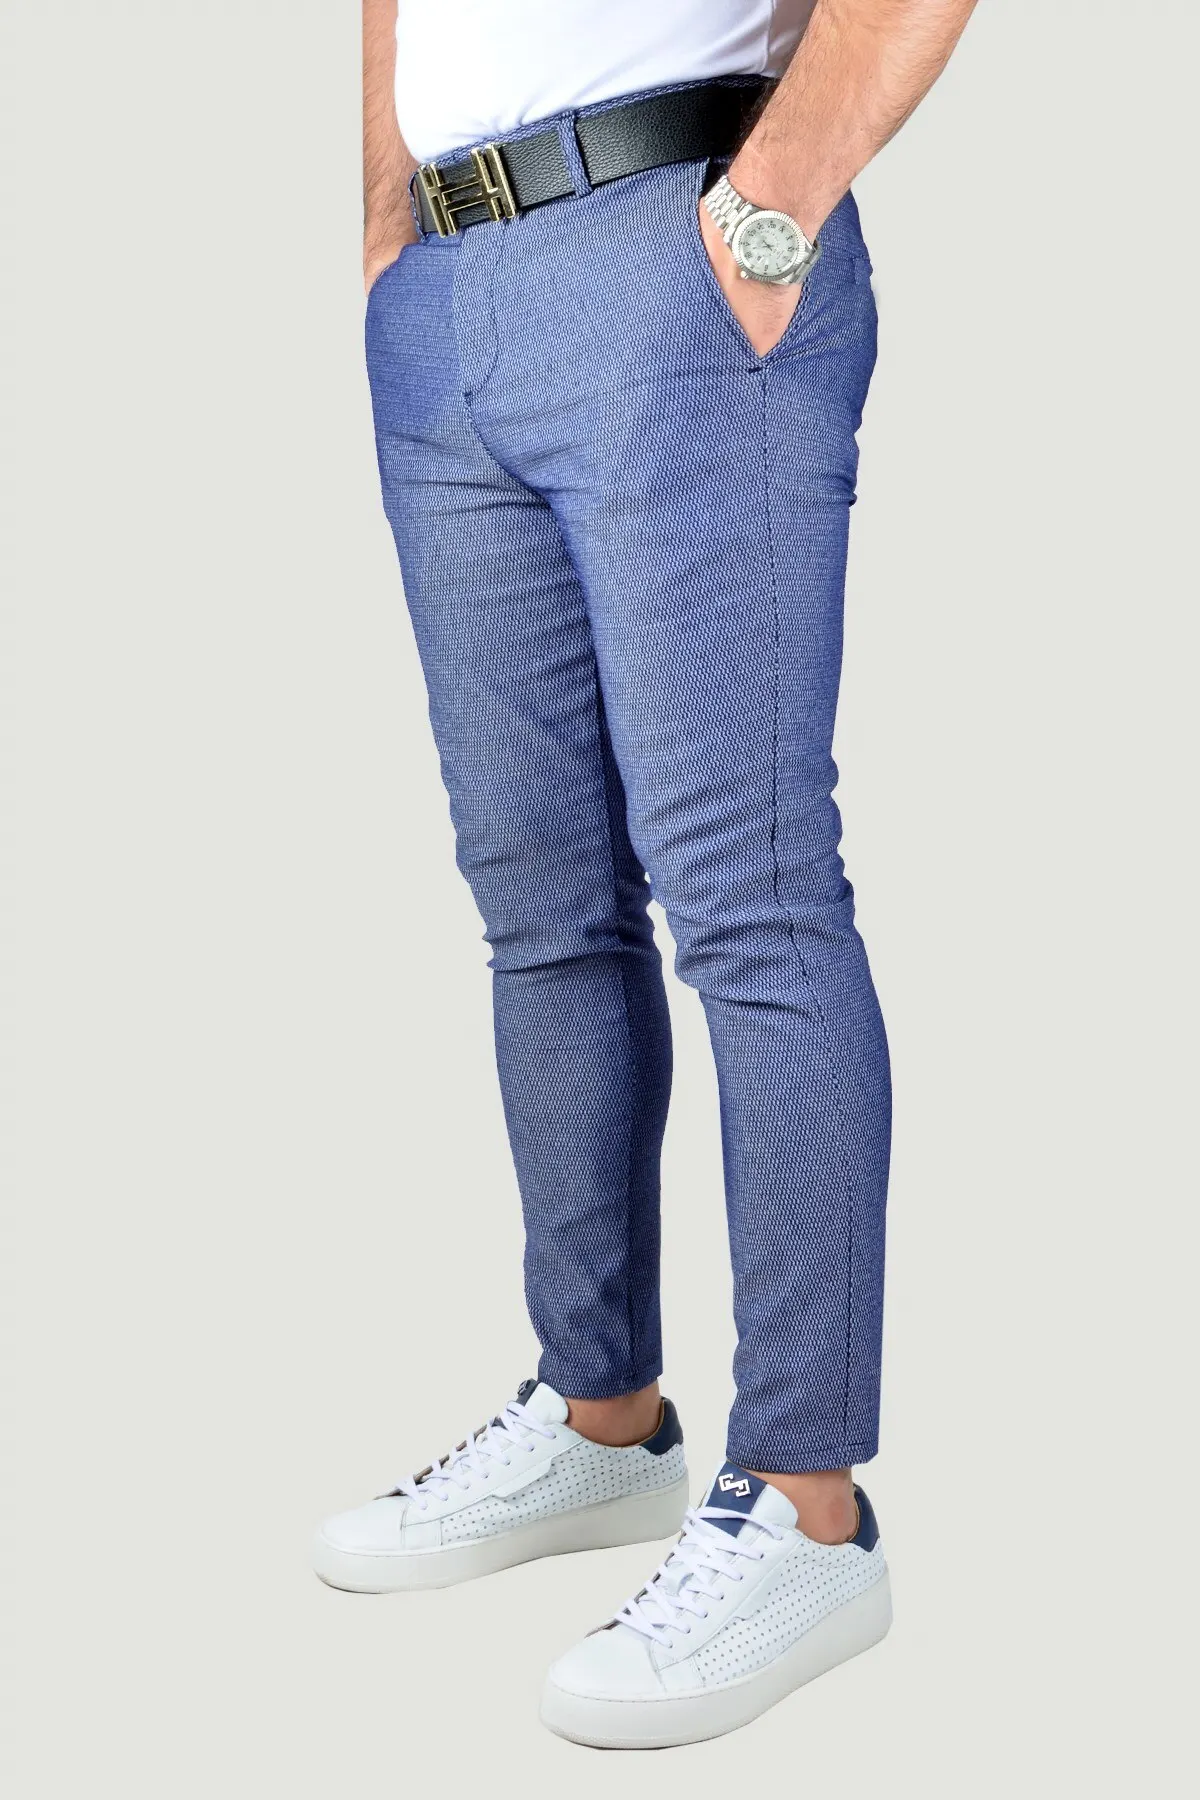 Men's Clothing Overalls Pants Trousers Slim Fit Linen For Office & Work Flexible Comfortable Tight-Fitting Stylish Smart Casual